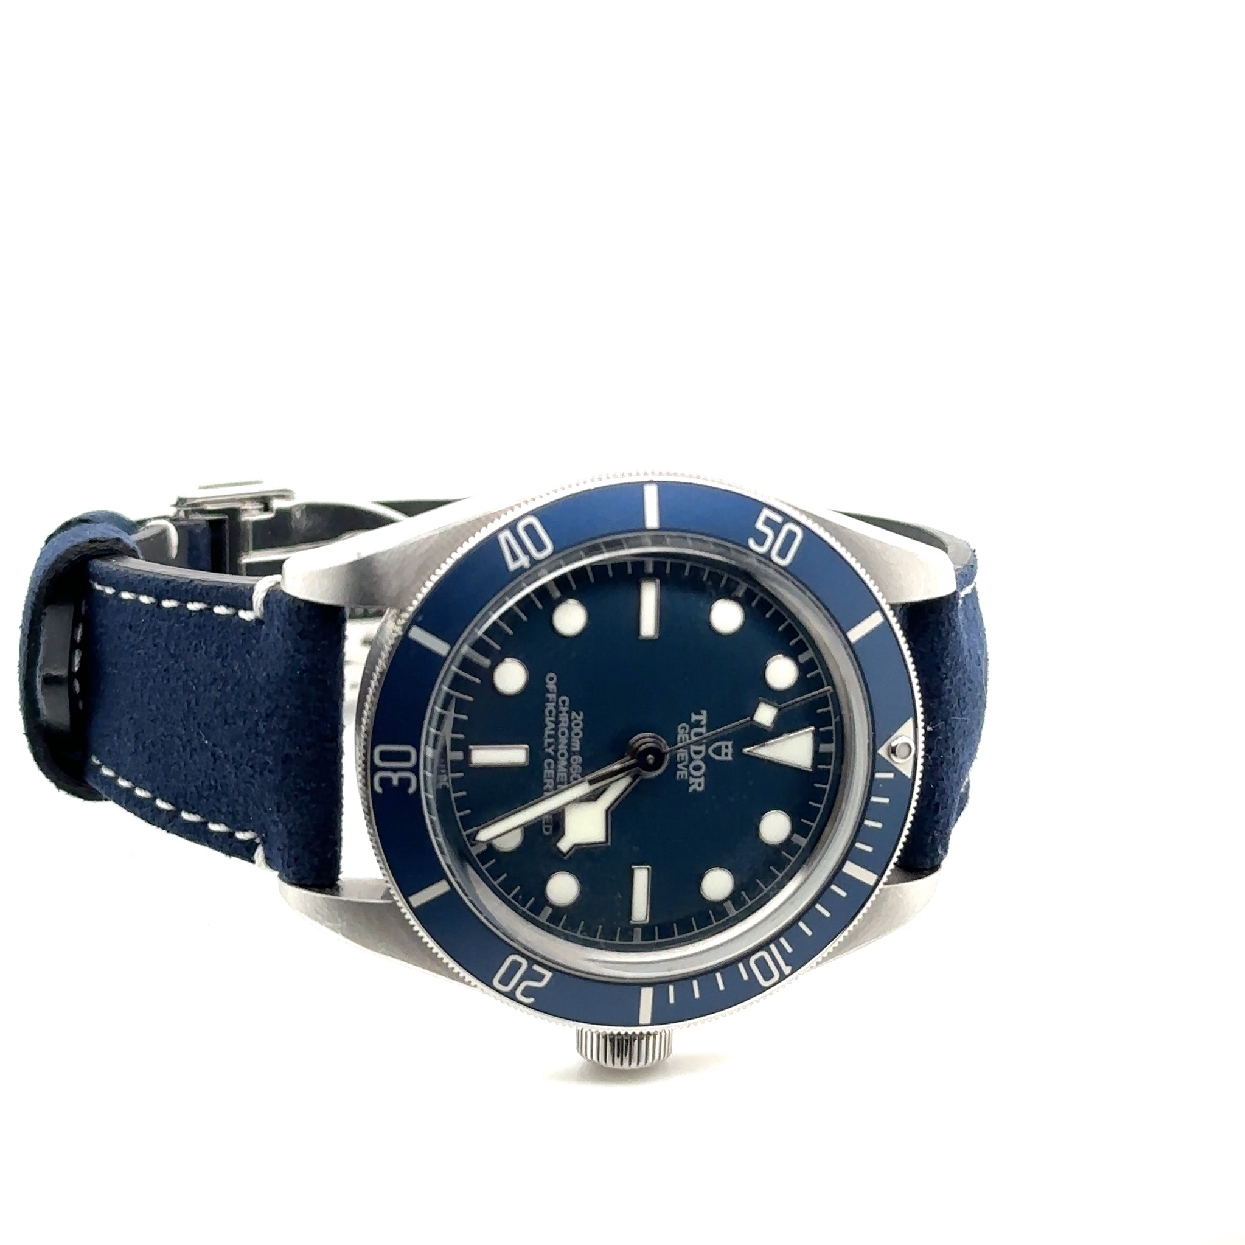 Tudor Geneve 200m/600ft Chronometer Watch with Blue Dial; Watch Face and Suede Band with Box and Papers

Serial Number: 926U913
Model Number: 79030B
